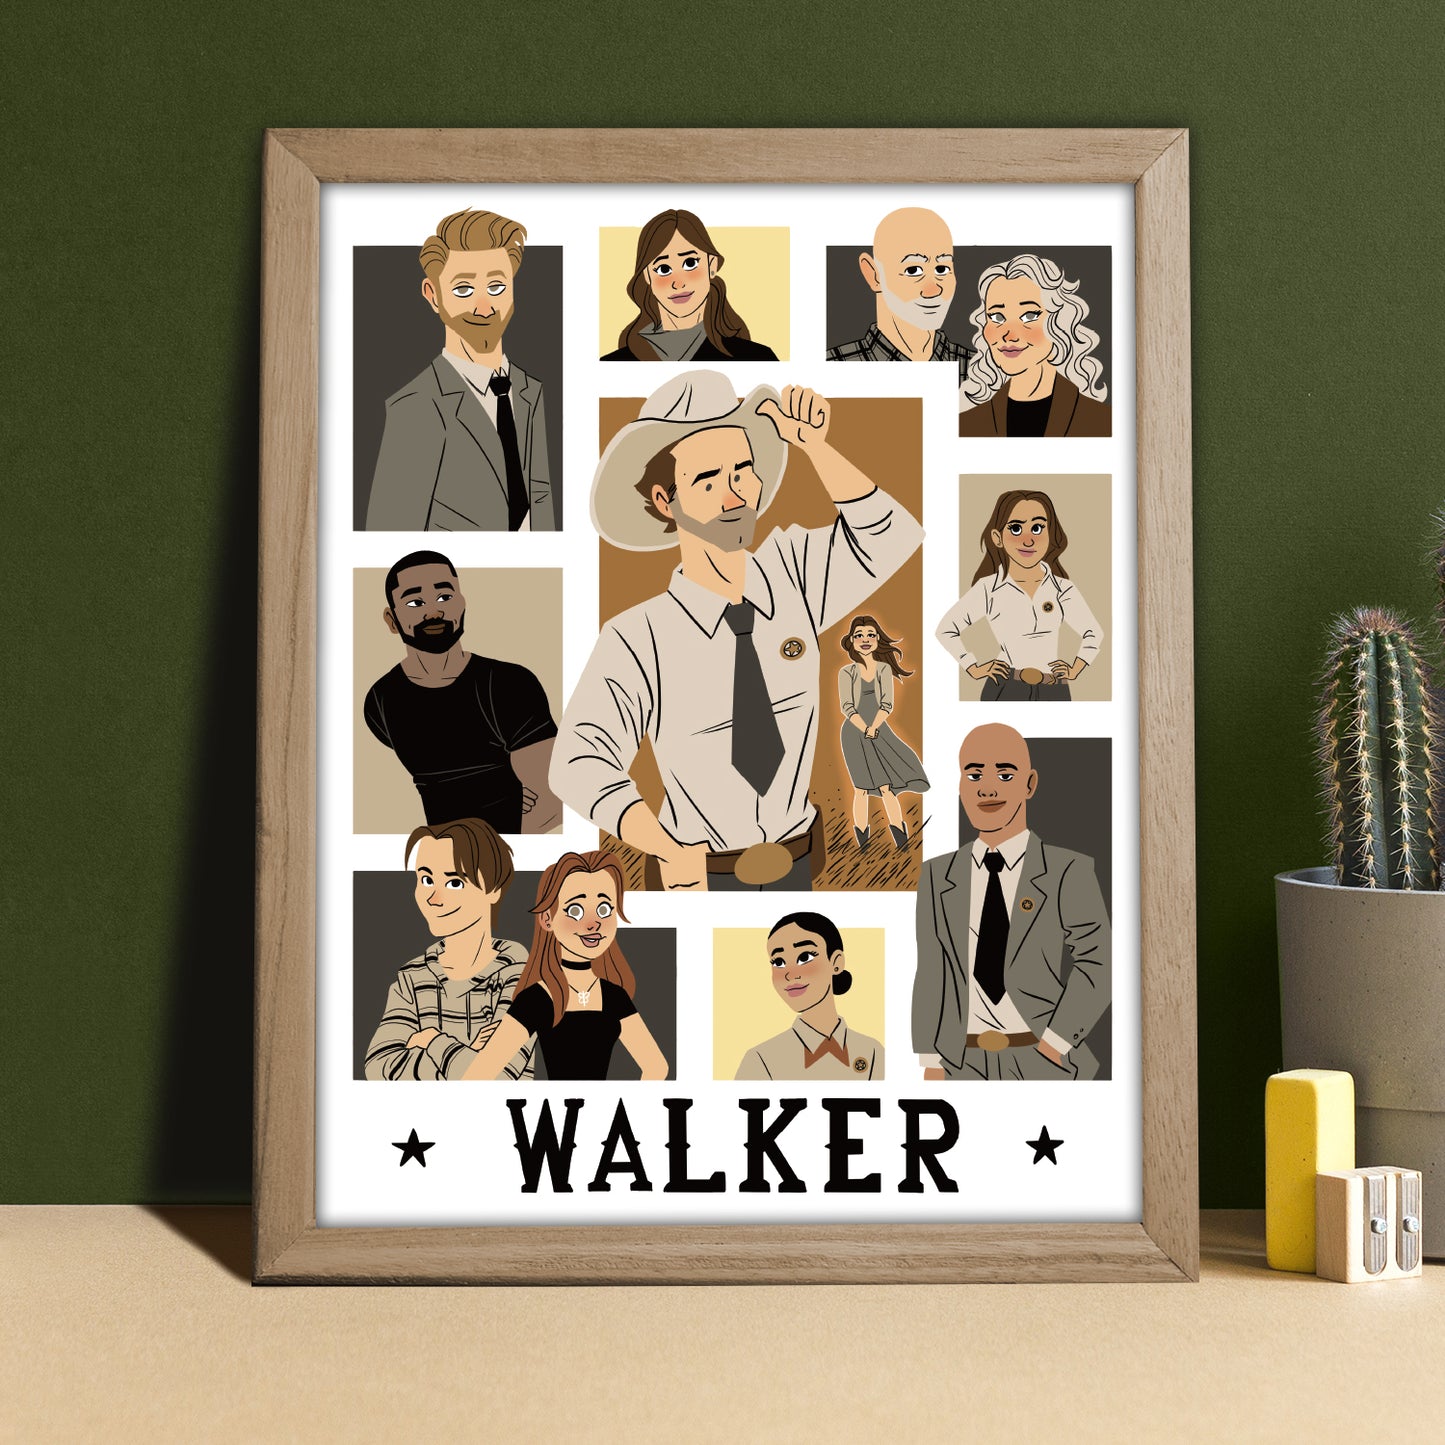 A framed print, against a dark green wall. The print depicts cartoon-style drawings of characters from the series "Walker." Black text at the bottom of the print says "Walker." Next to the framed print is a potted cactus, an eraser, and a pencil sharpener.